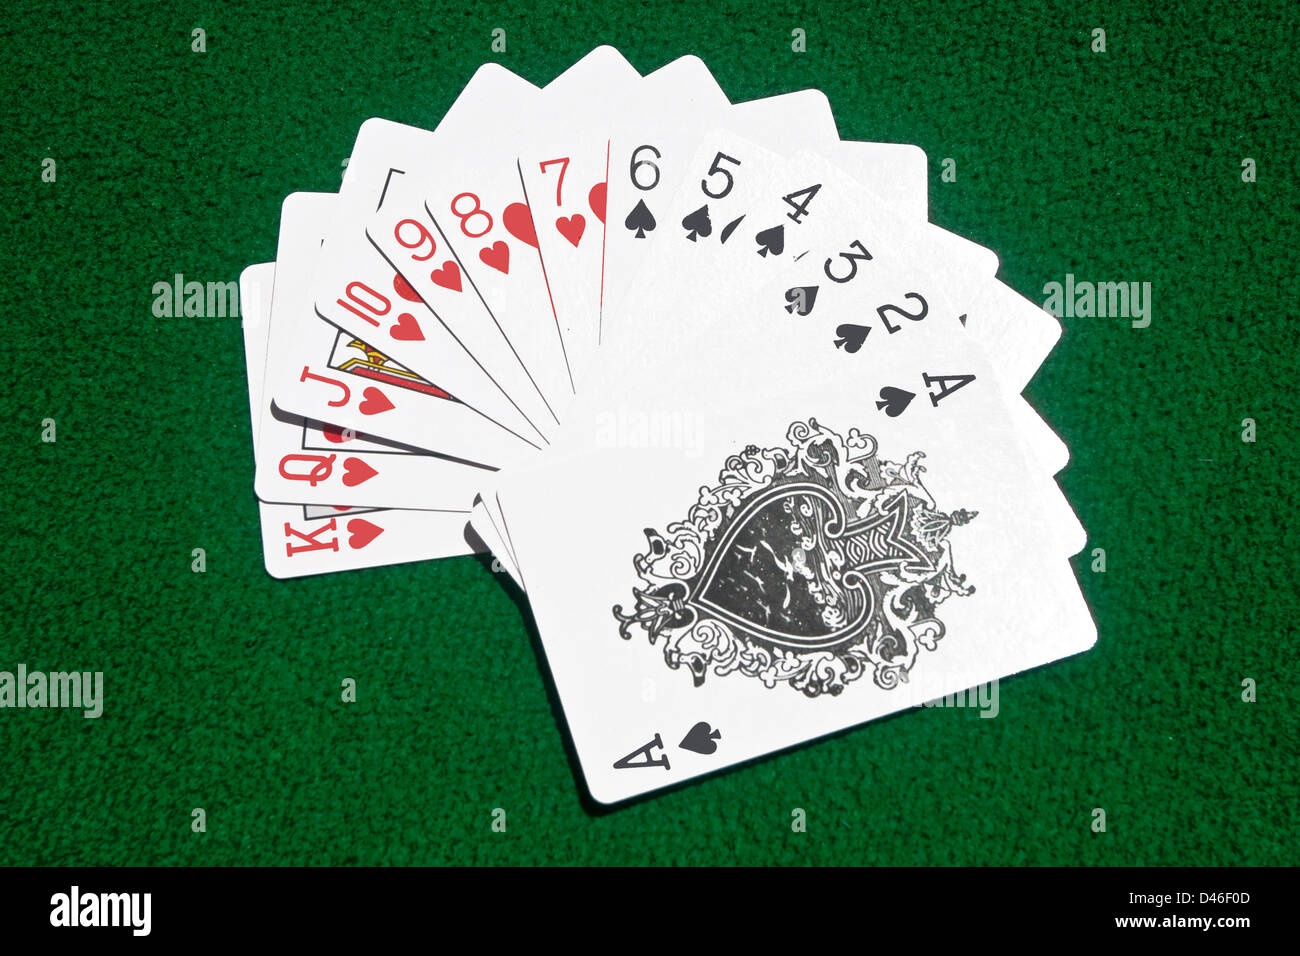 Playing cards of Hearts and Spades put streetwise on the playing table. Stock Photo